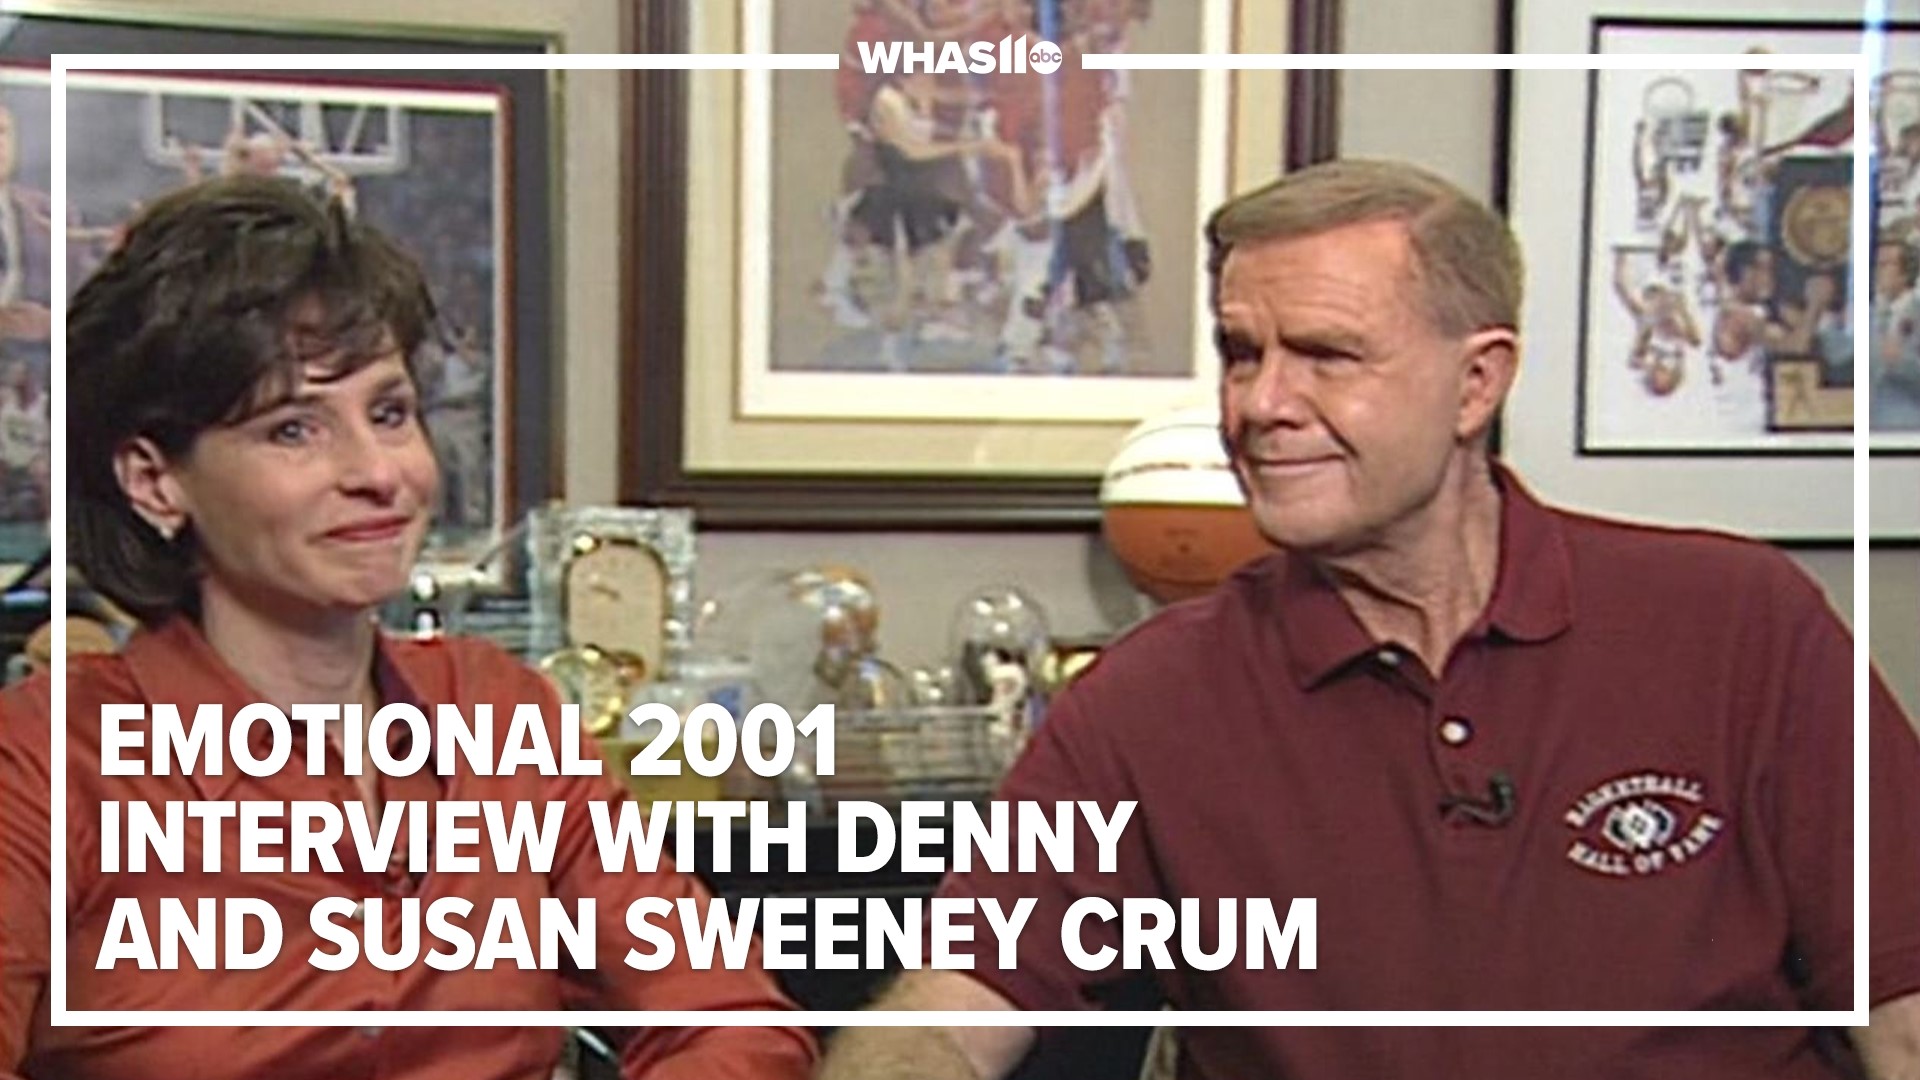 More than 20 years ago, WHAS11 News anchor Rachel Platt interviewed Denny Crum and his then-Fiancé Susan Sweeney Crum.